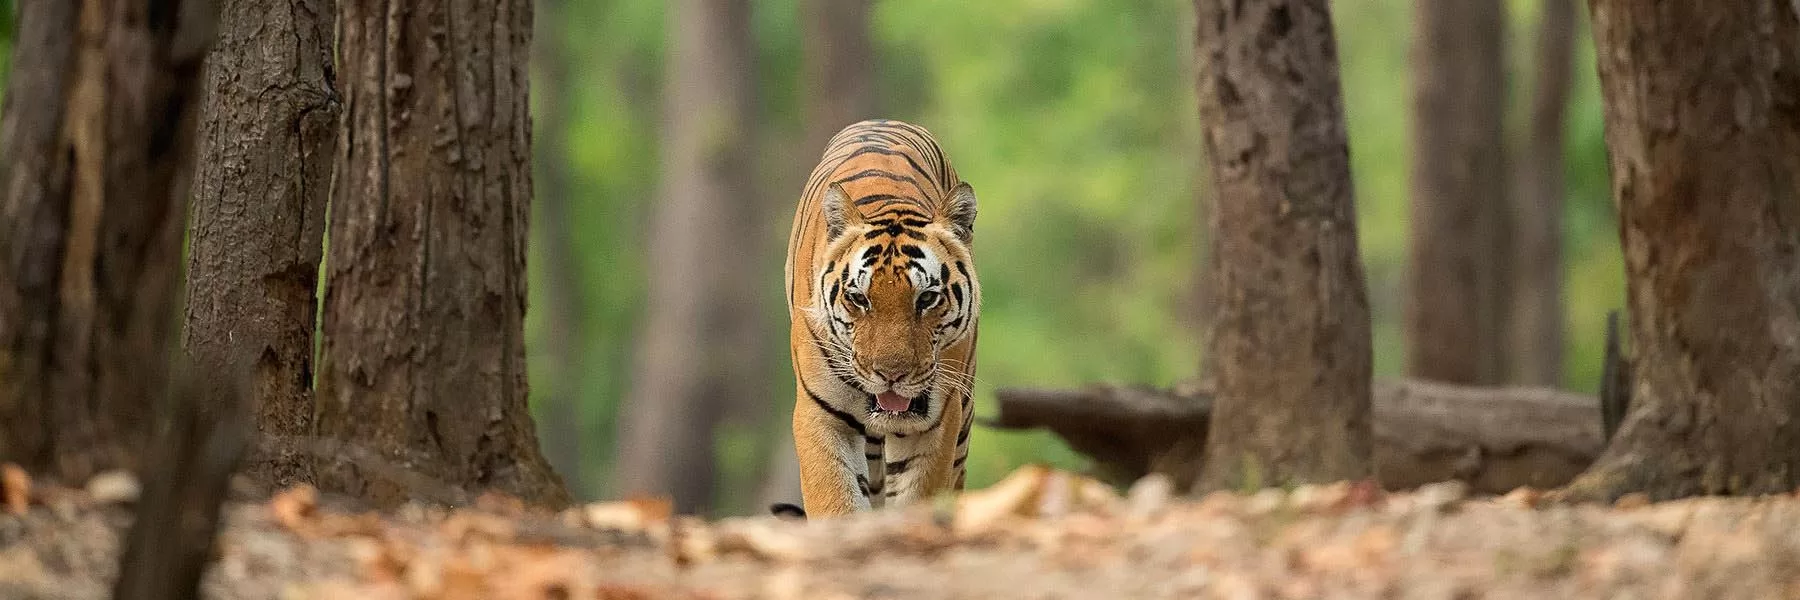 Spotting the elusive Tiger in India